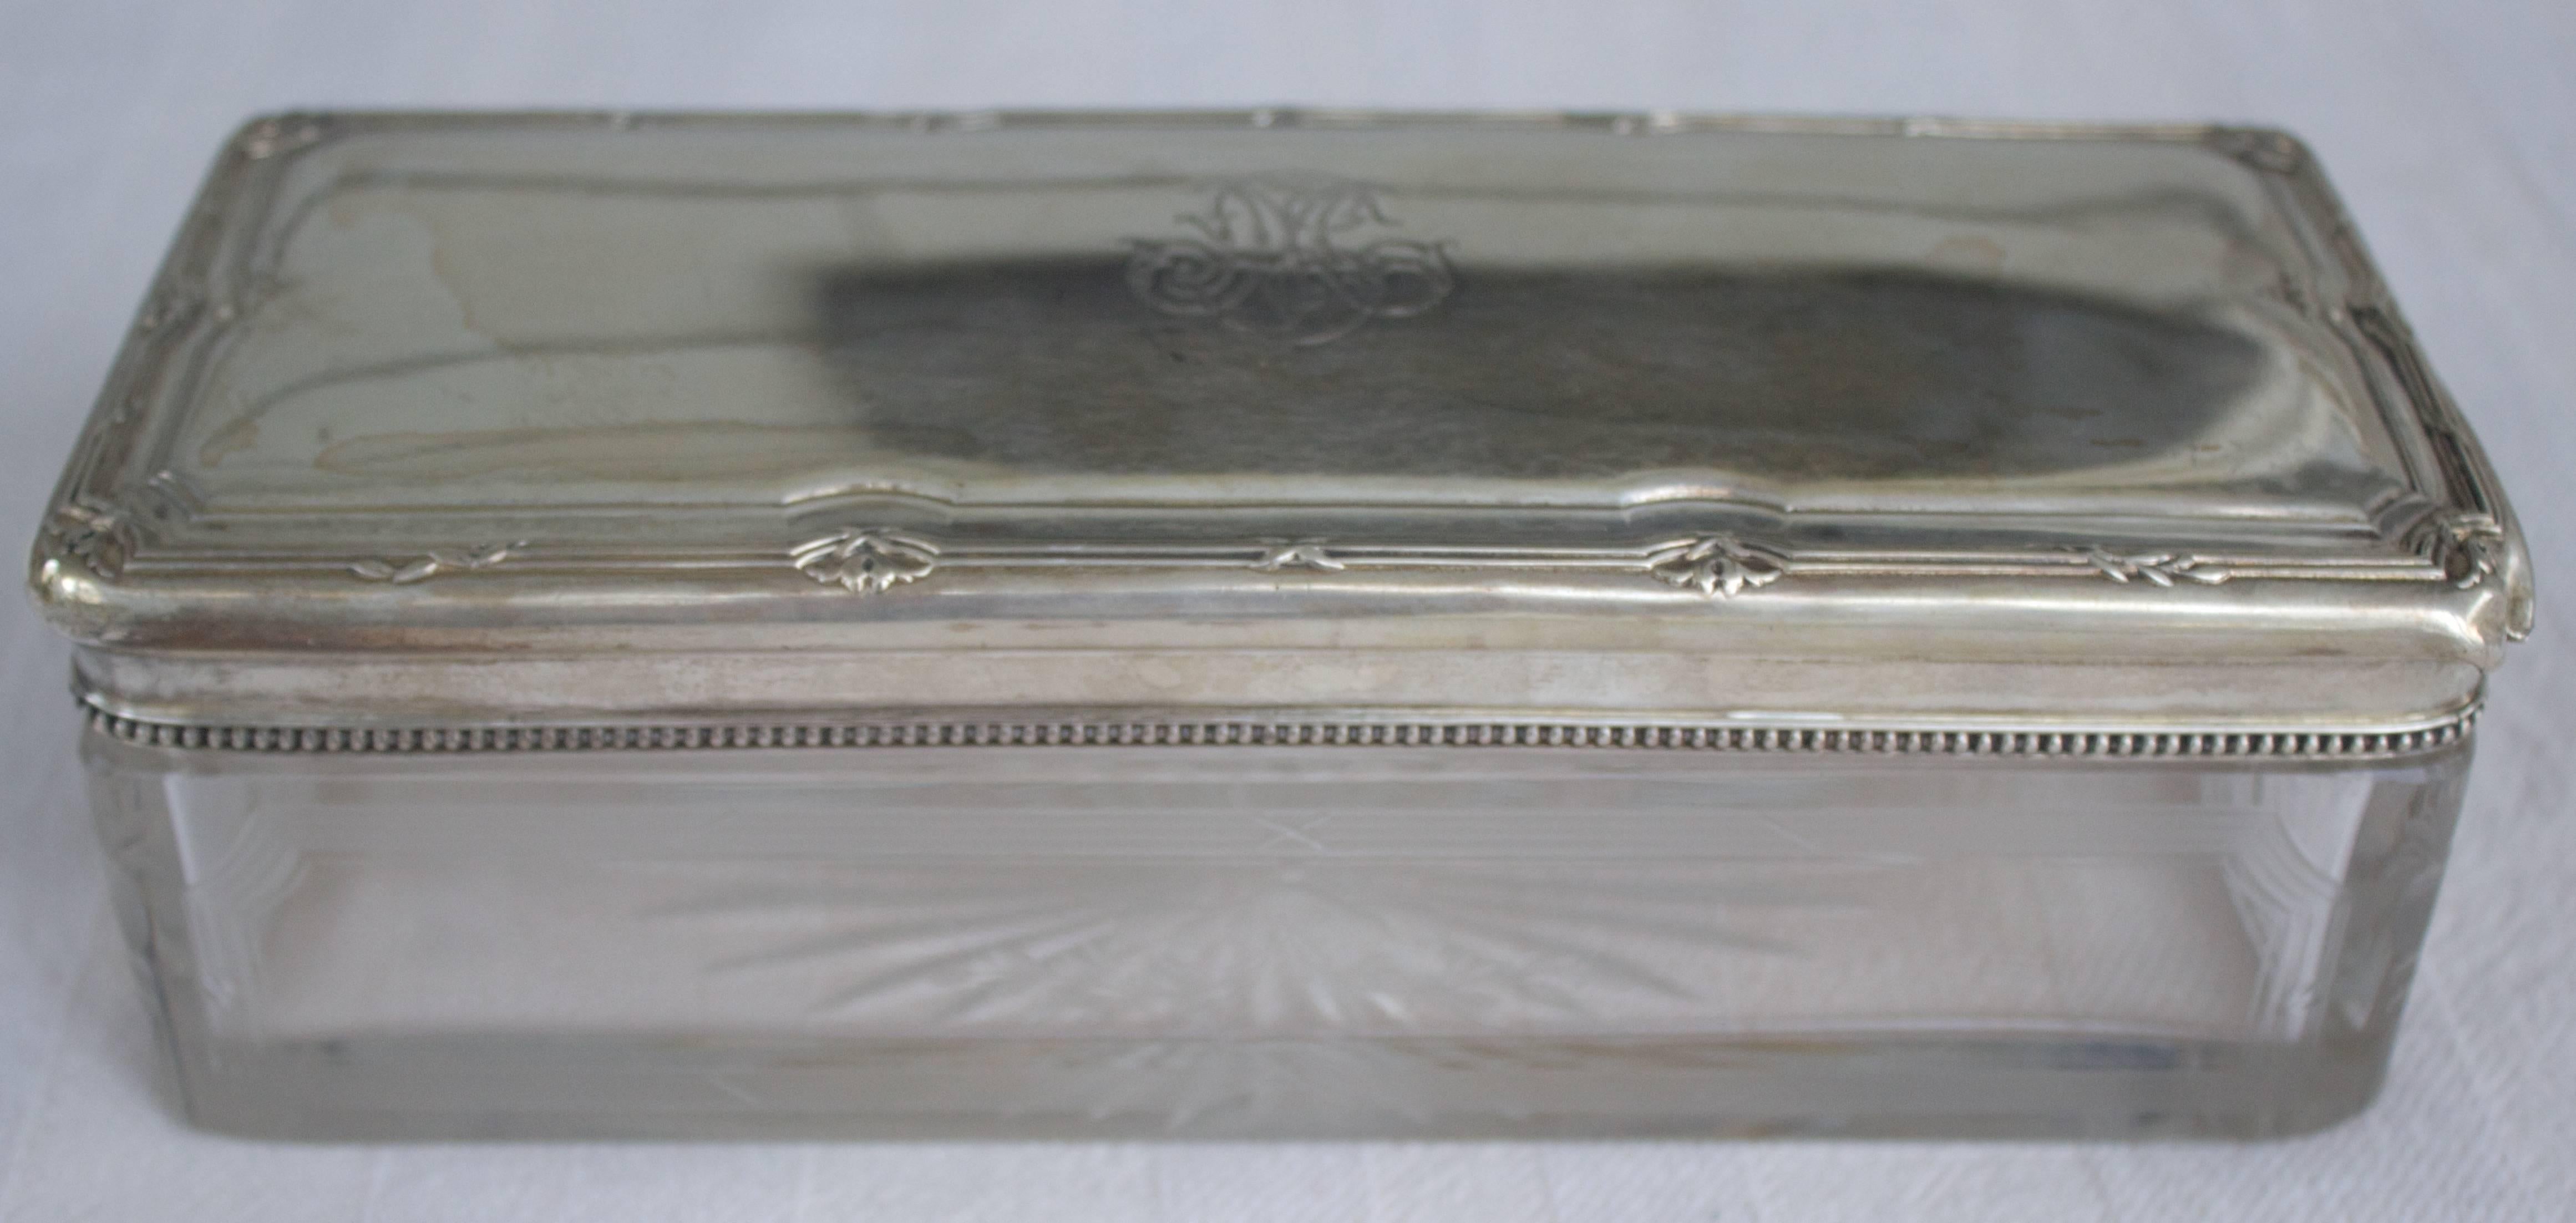 Rectangular casket in engraved crystal body with silver top monogrammed and chased on top.
A great gift!